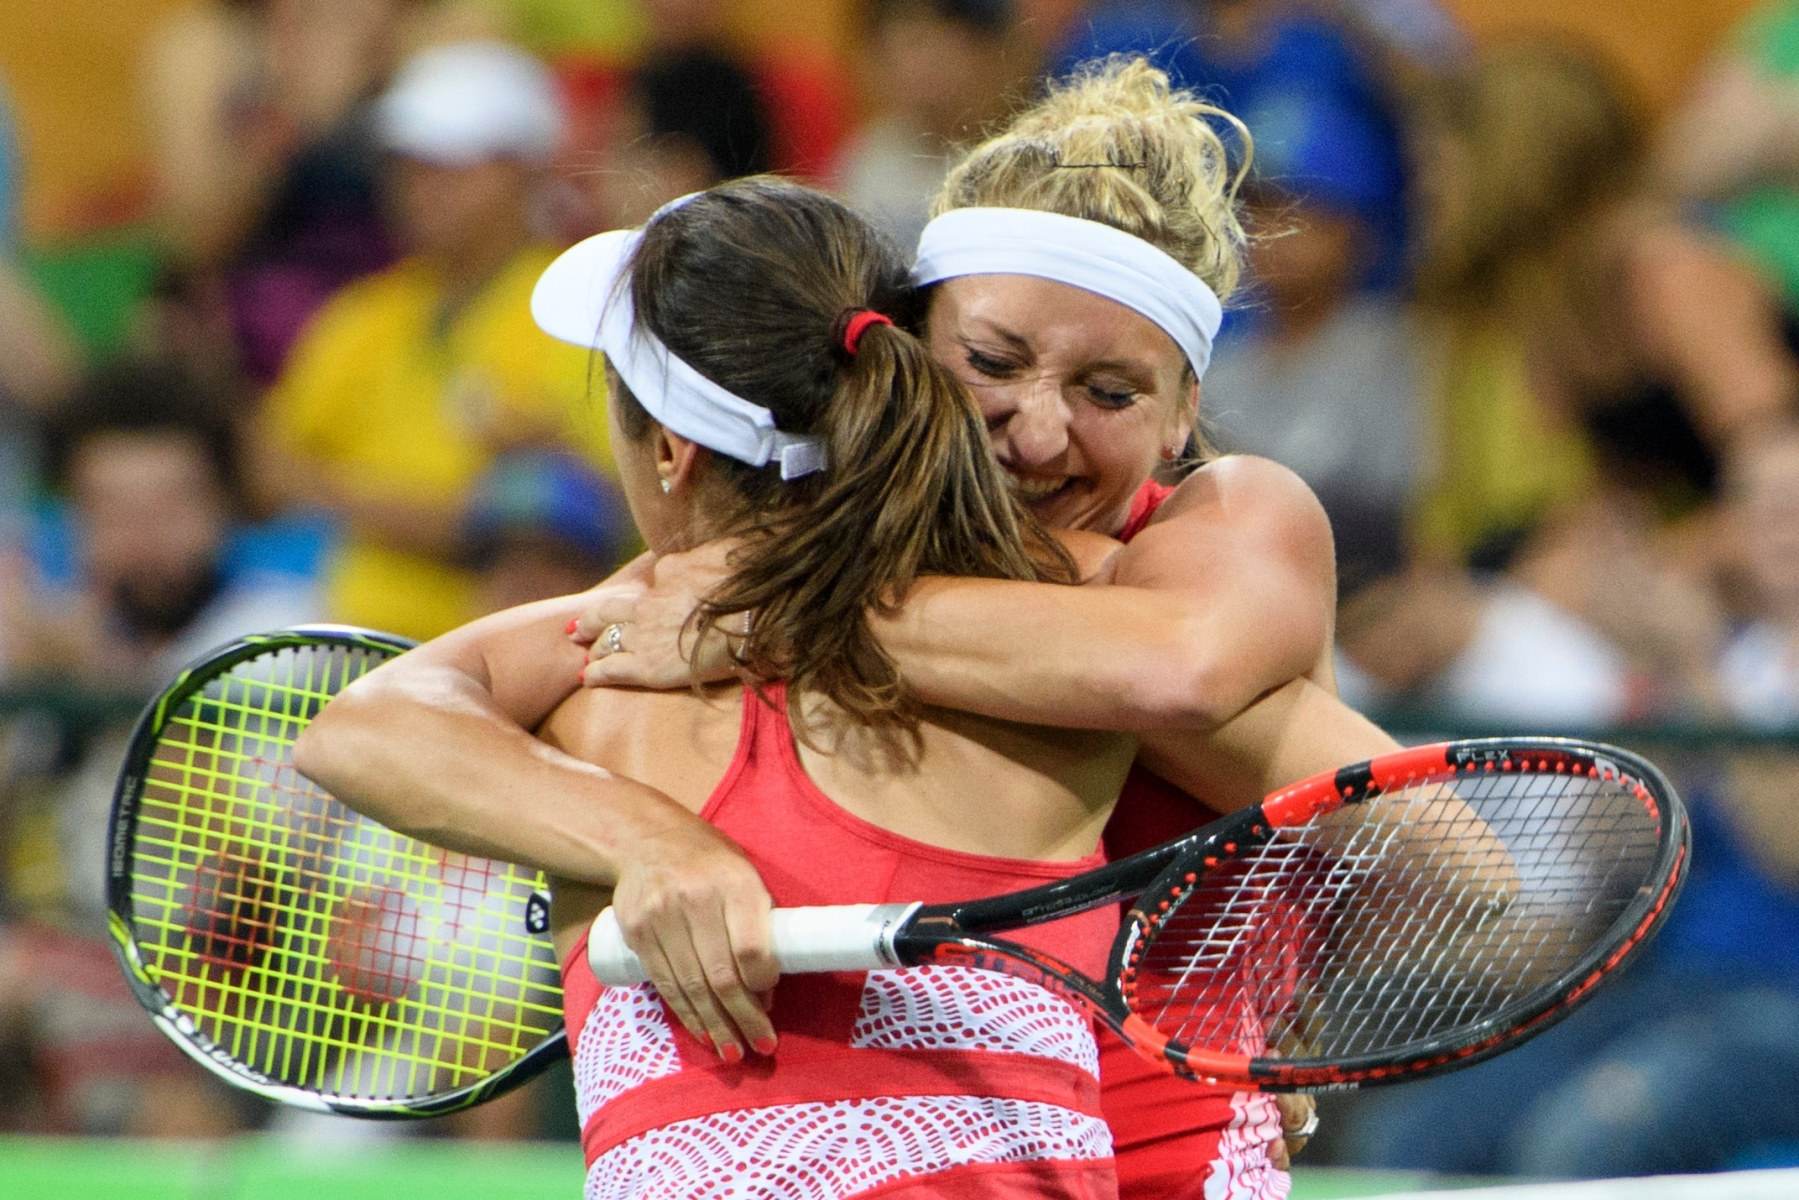 Timea Bacsinszky, right, and Martina Hingis, left, of Switzerland celebrate the victory after the womenøs first round doubles match against Daria Gavrilova and Samantha Stosur from Australia at the Olympic Tennis Center in Rio de Janeiro, Brazil, at the Rio 2016 Olympic Summer Games, pictured on Saturday, August 06, 2016. (KEYSTONE/Laurent Gillieron) BRAZIL RIO OLYMPICS 2016 TENNIS DOUBLE